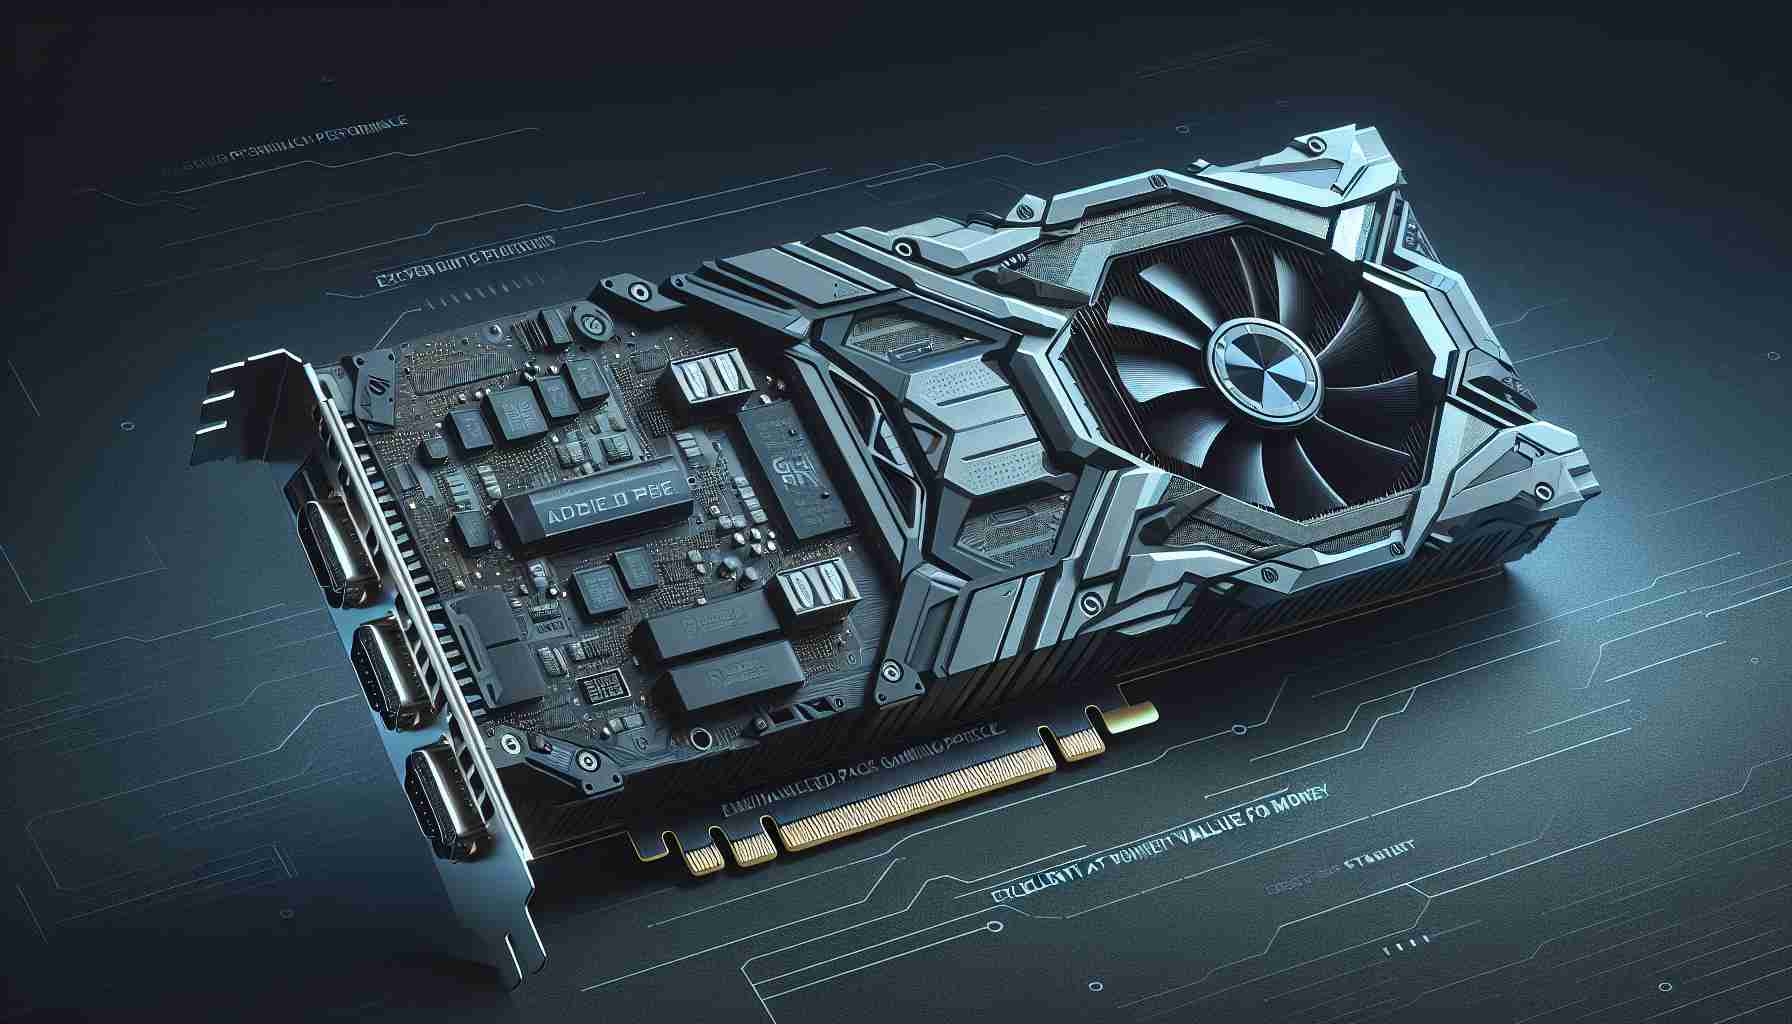 The Sapphire Pulse Radeon RX 7900 XT: Unleashing Powerful Gaming Performance at an Unbeatable Price